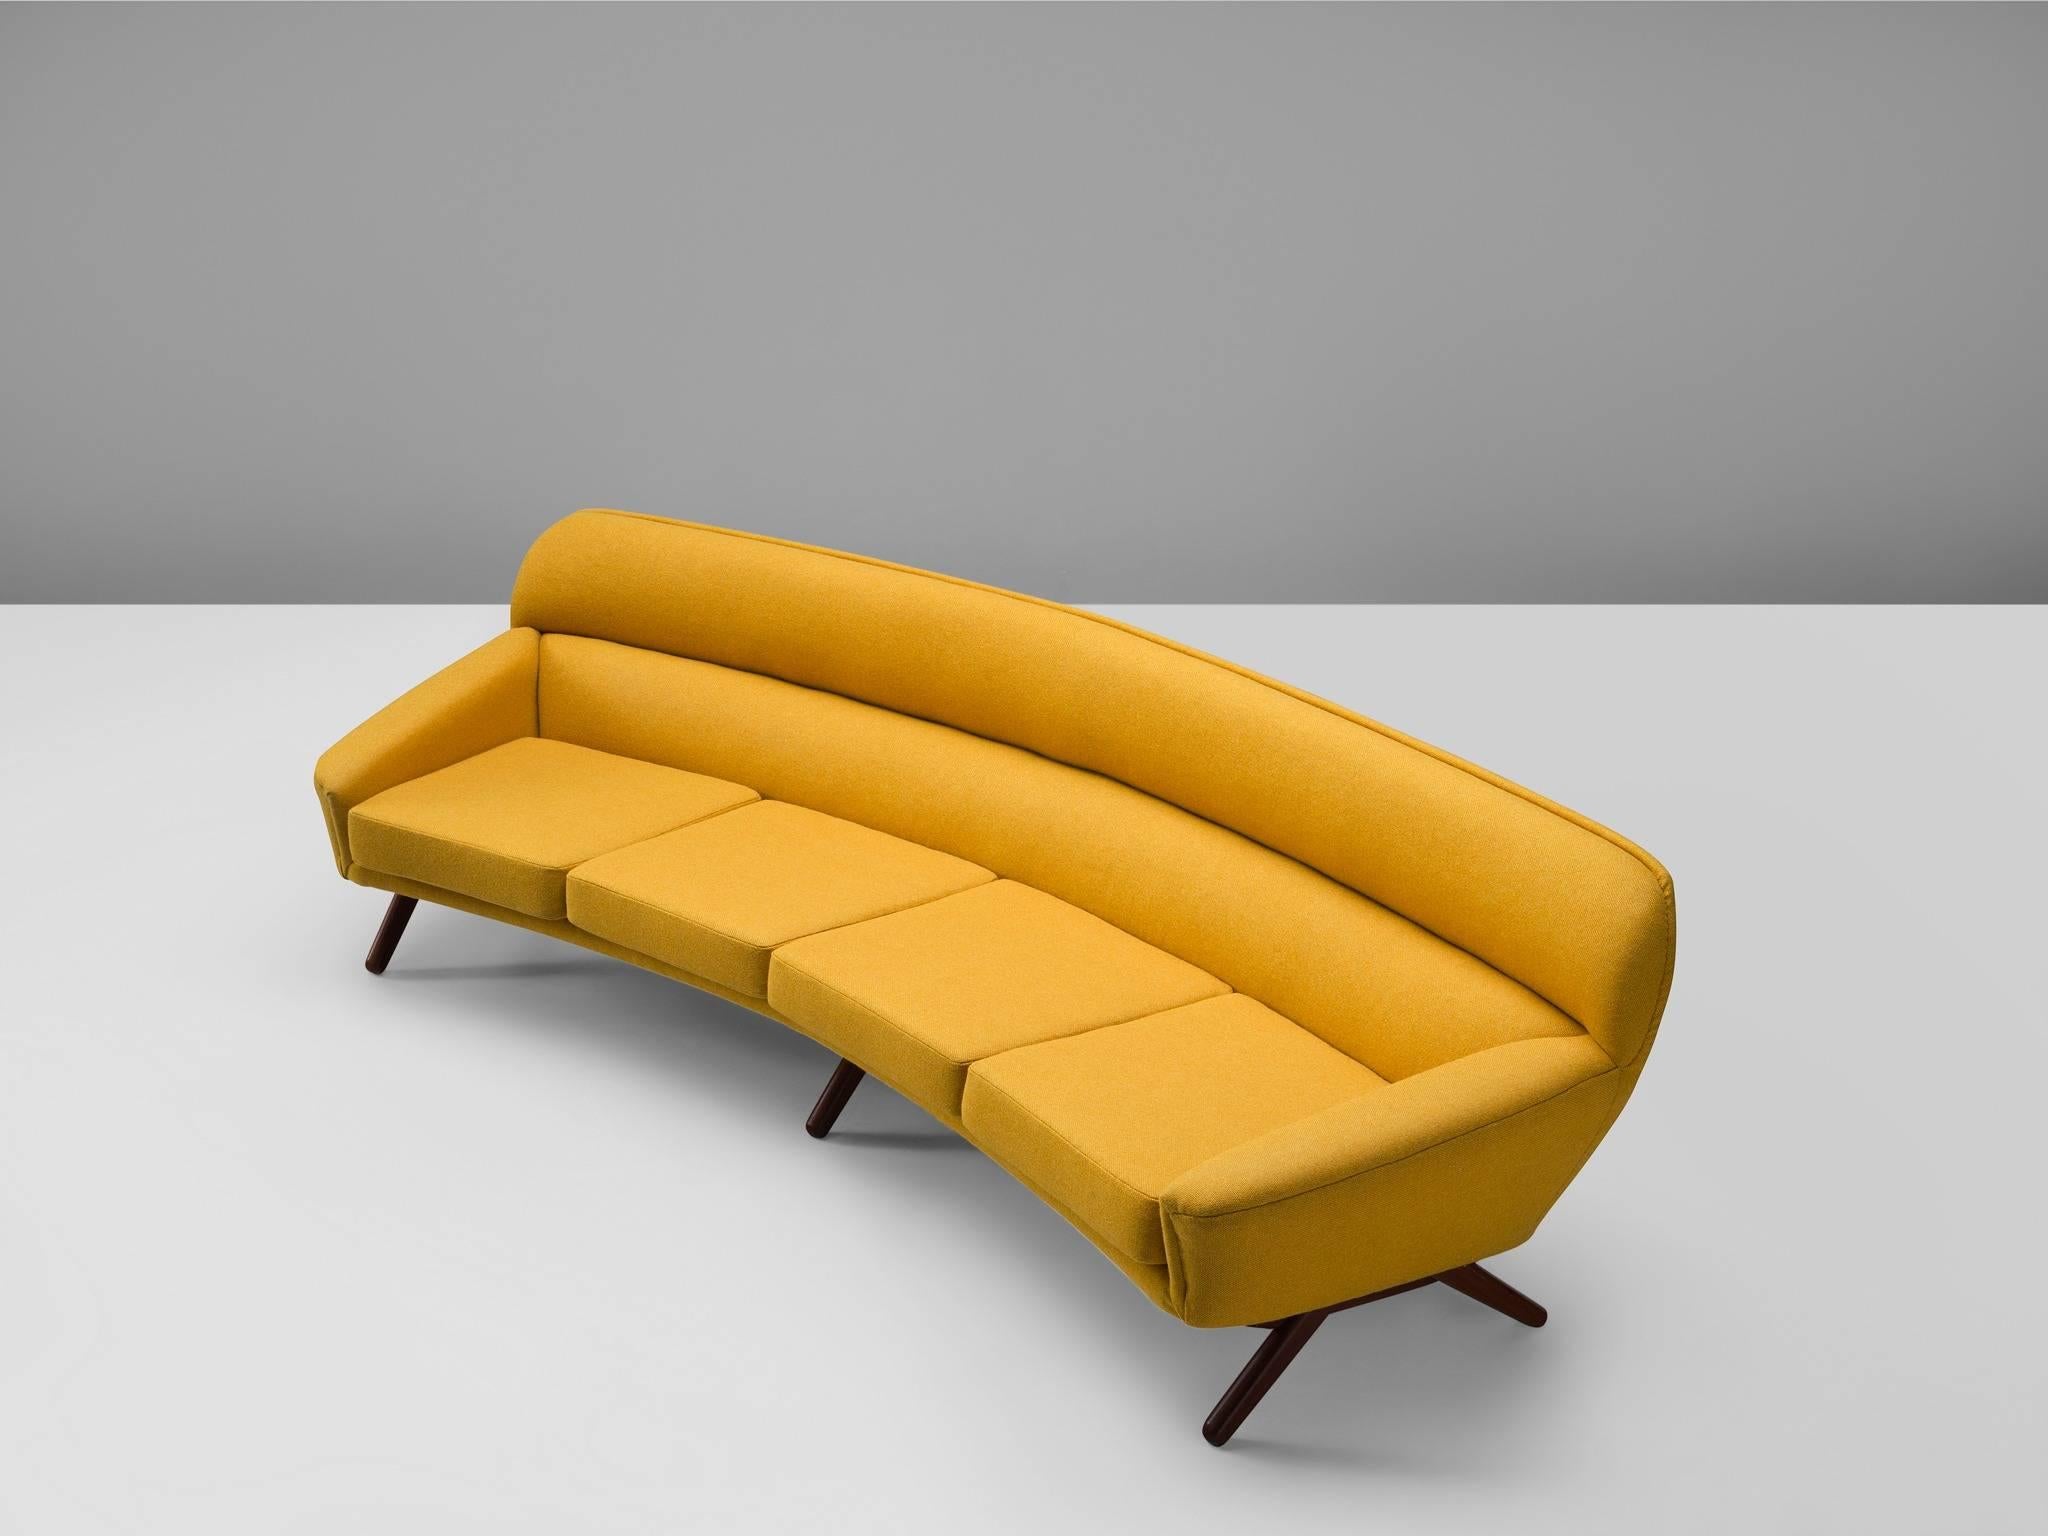 Danish sofa in yellow upholstery and teak, designed by Leif Hansen, Denmark, 1960s. 

This curved sofa is designed to provide an ultimate level of comfort. The slightly curved and tilted back, the thick foam and high-quality fabric make this sofa